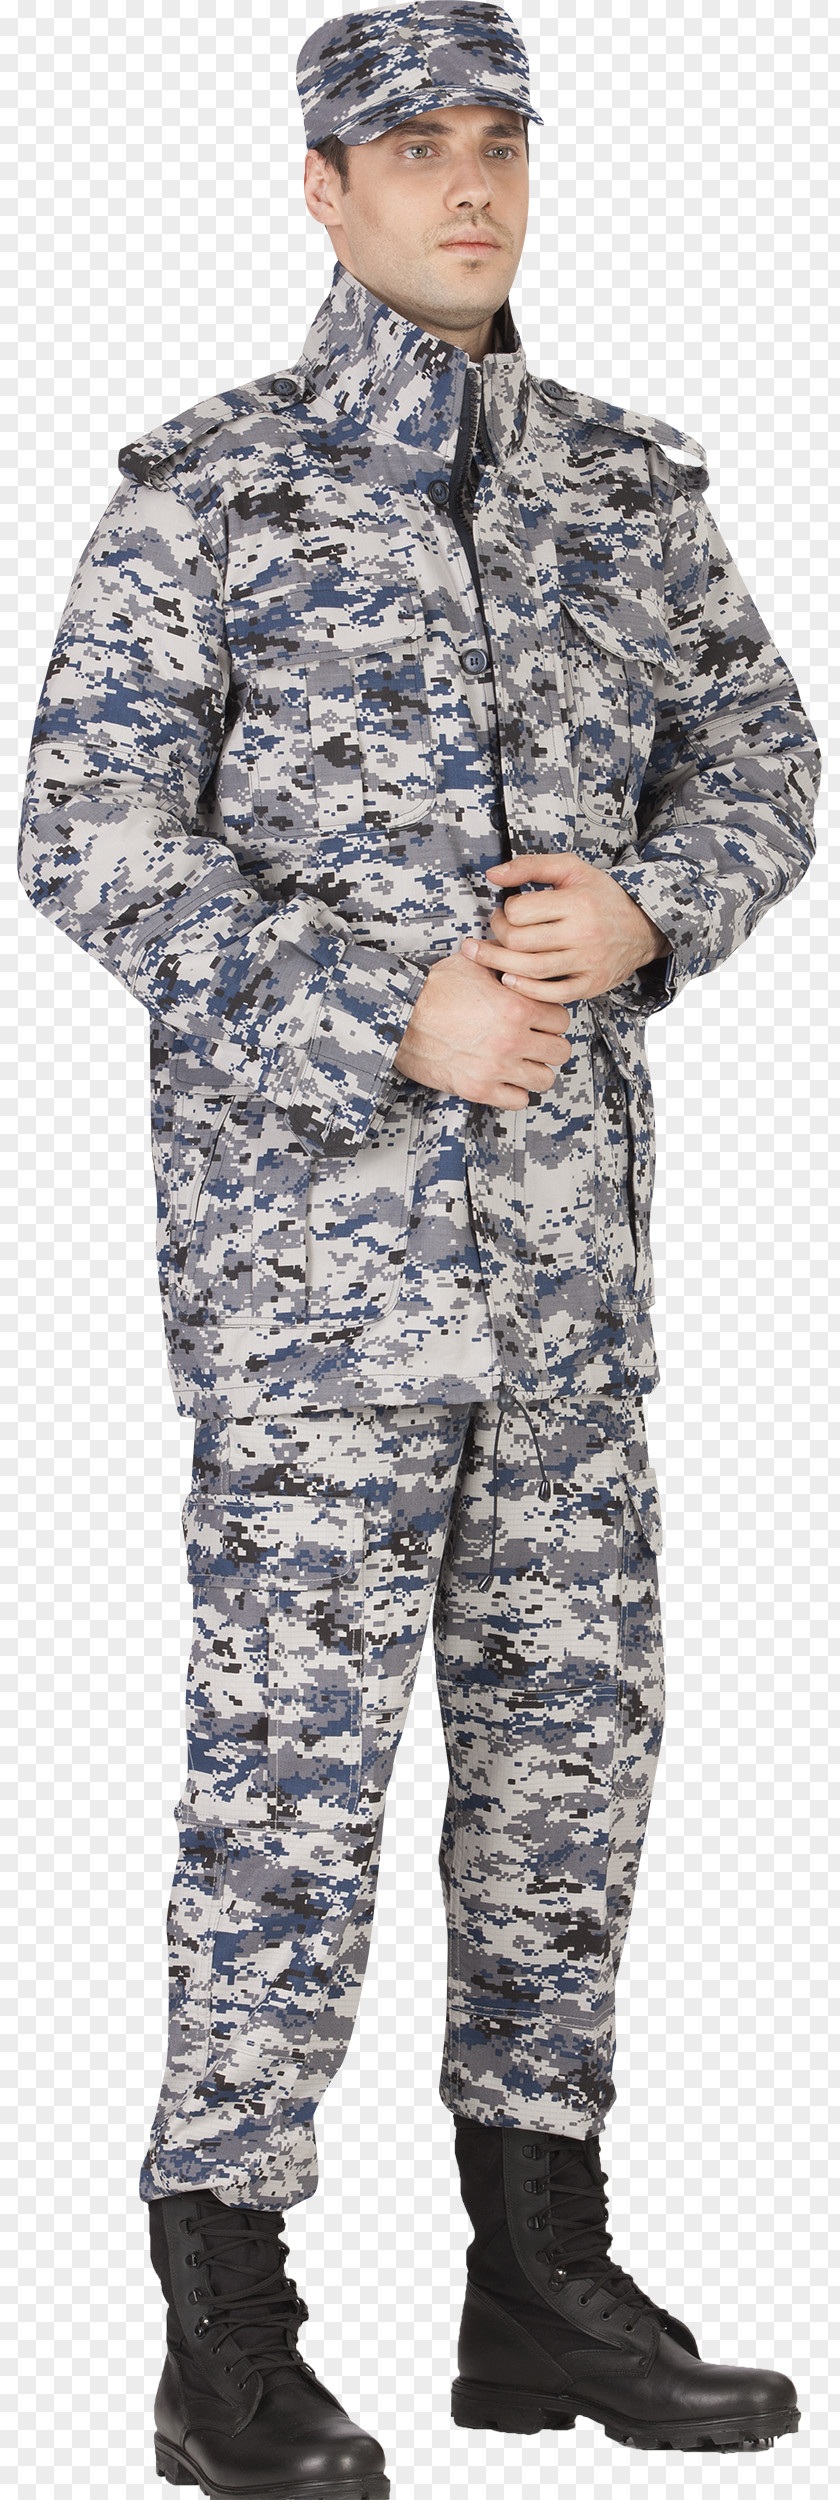 Soldier Military Camouflage Army PNG